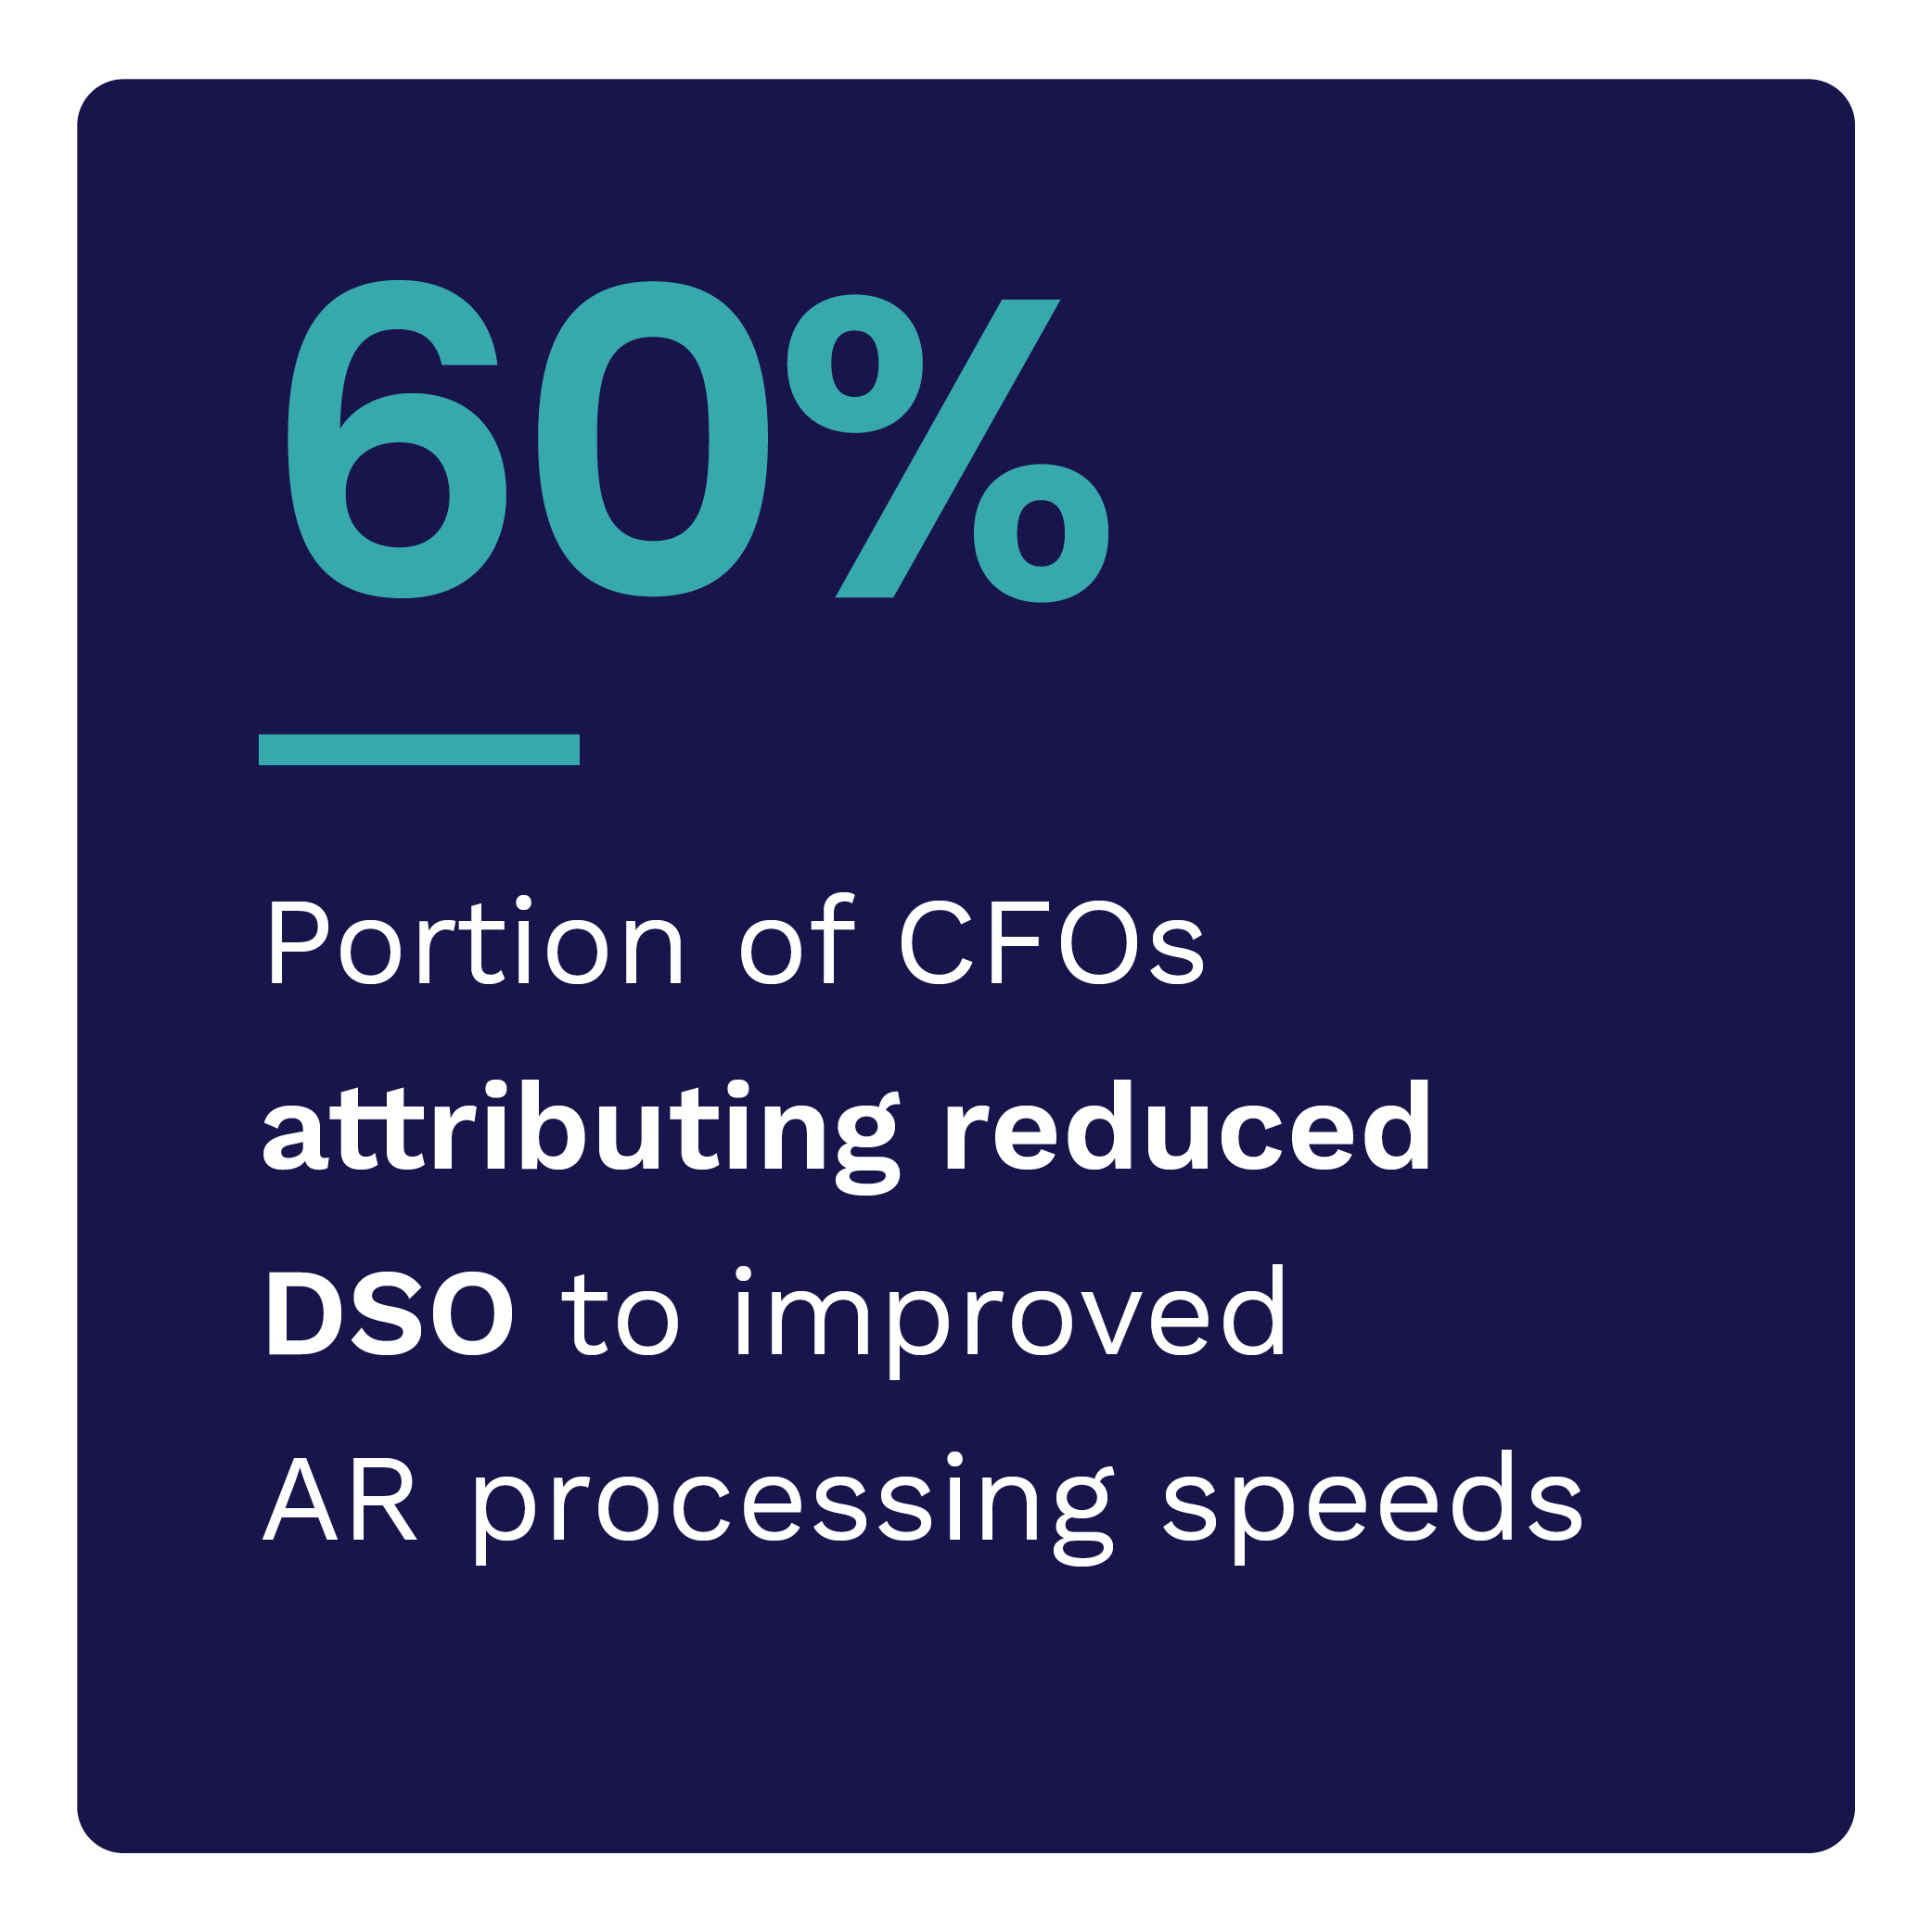 60%: Portion of CFOs attributing reduced DSO to improved AR processing speeds 